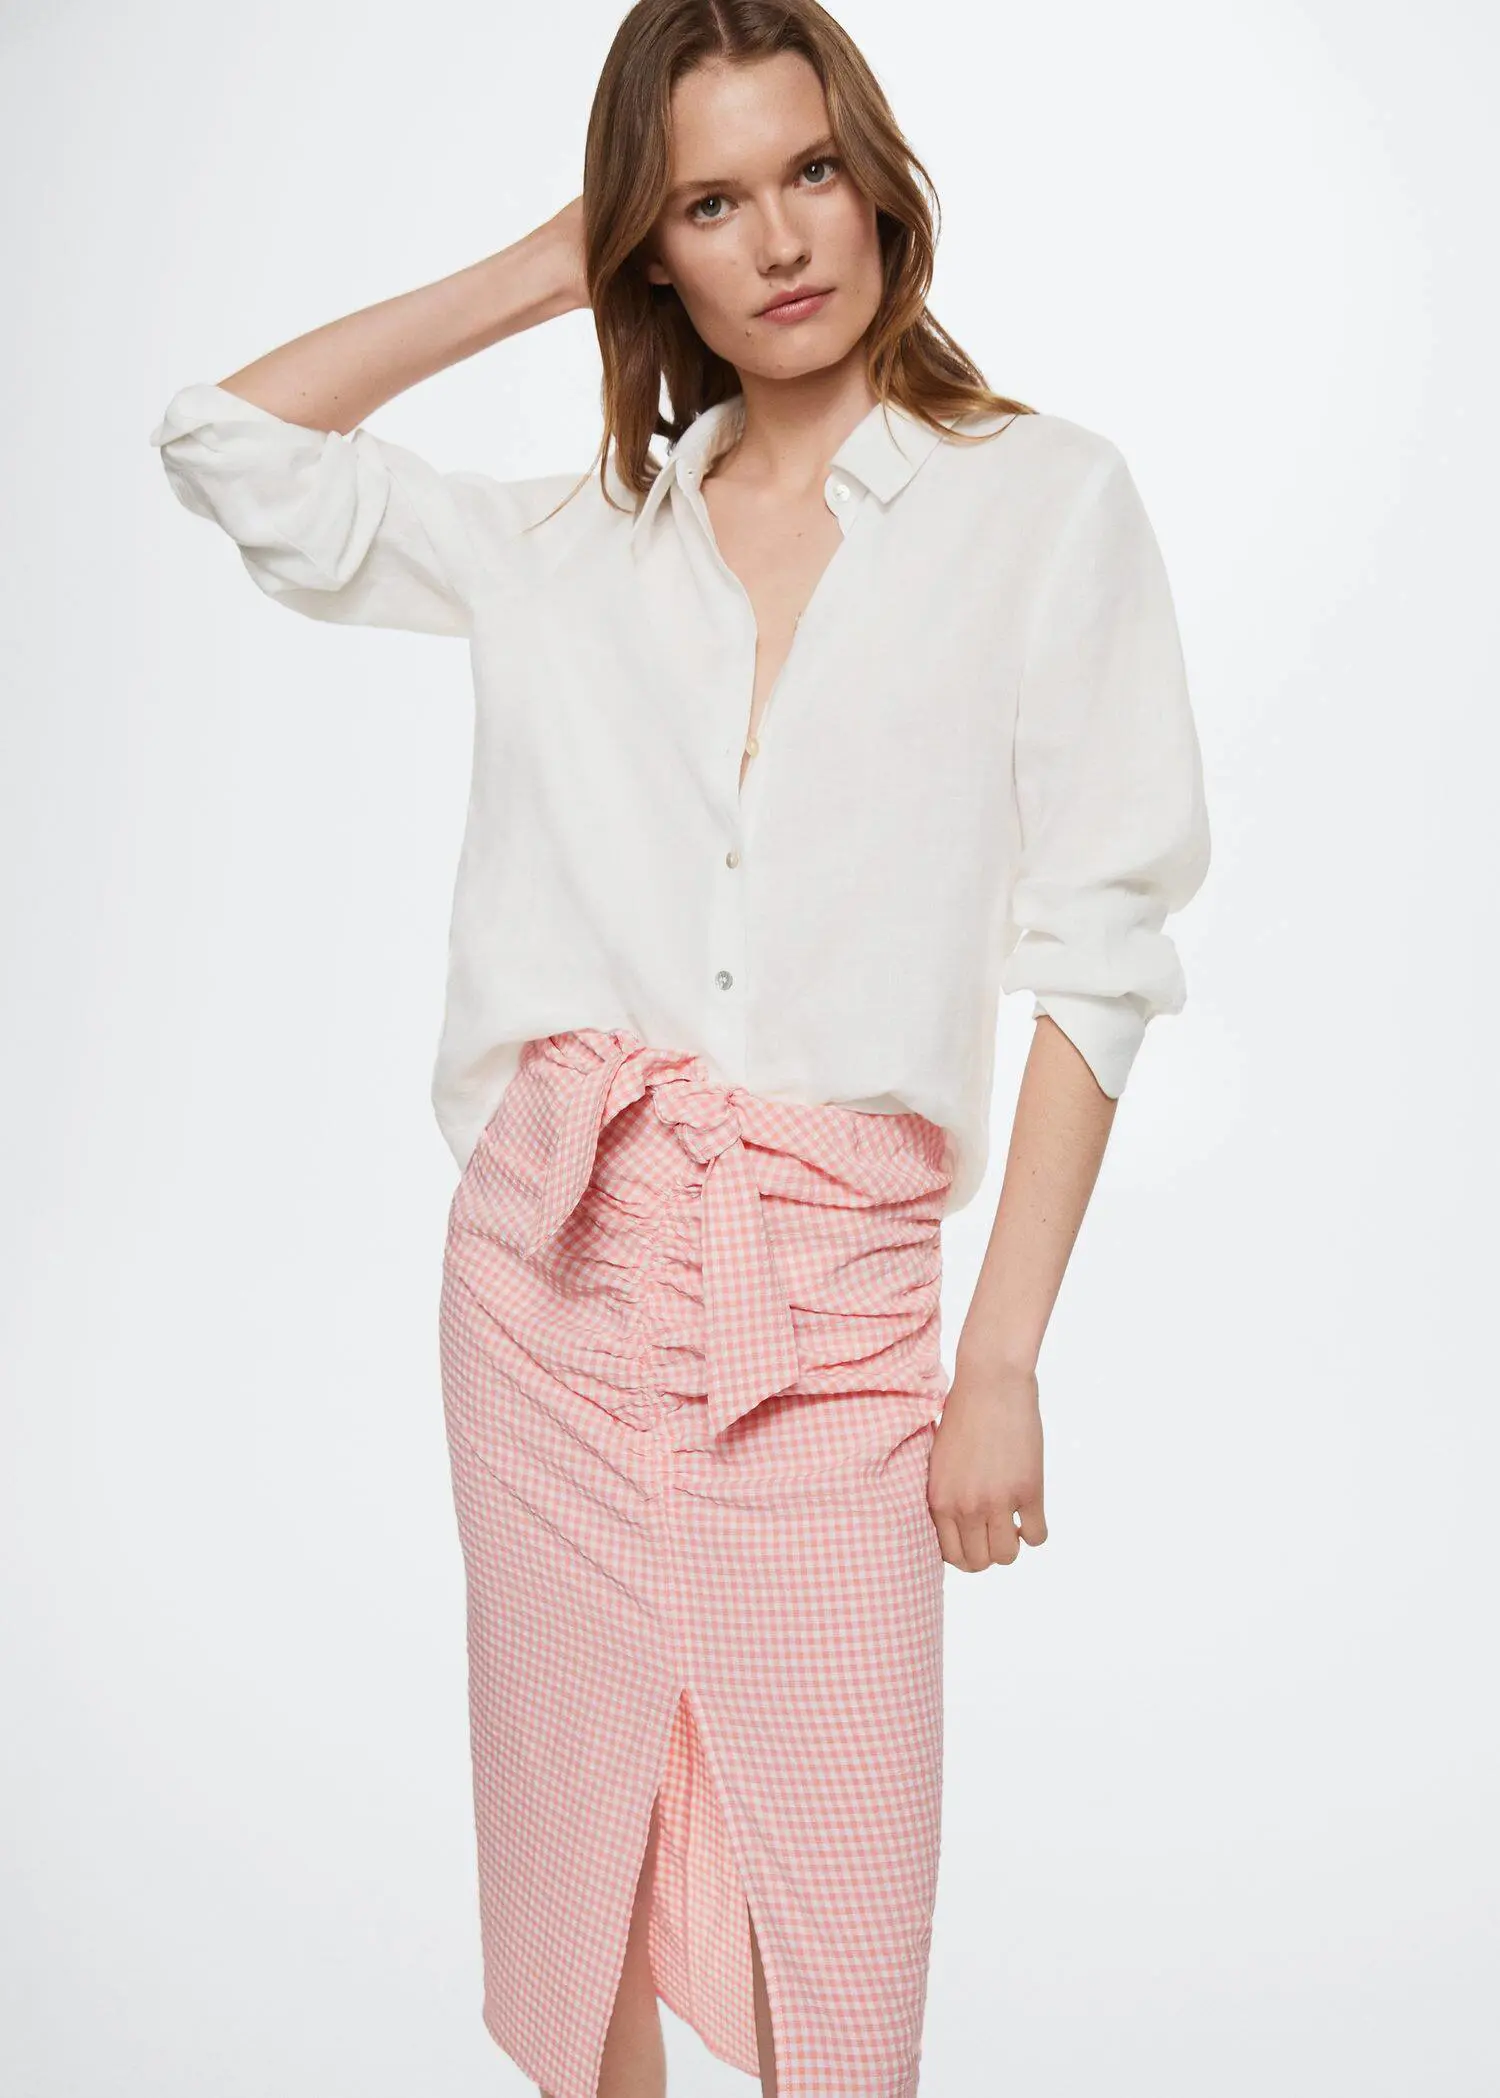 Mango Gingham pleated skirt. a woman wearing a white shirt and a pink skirt. 